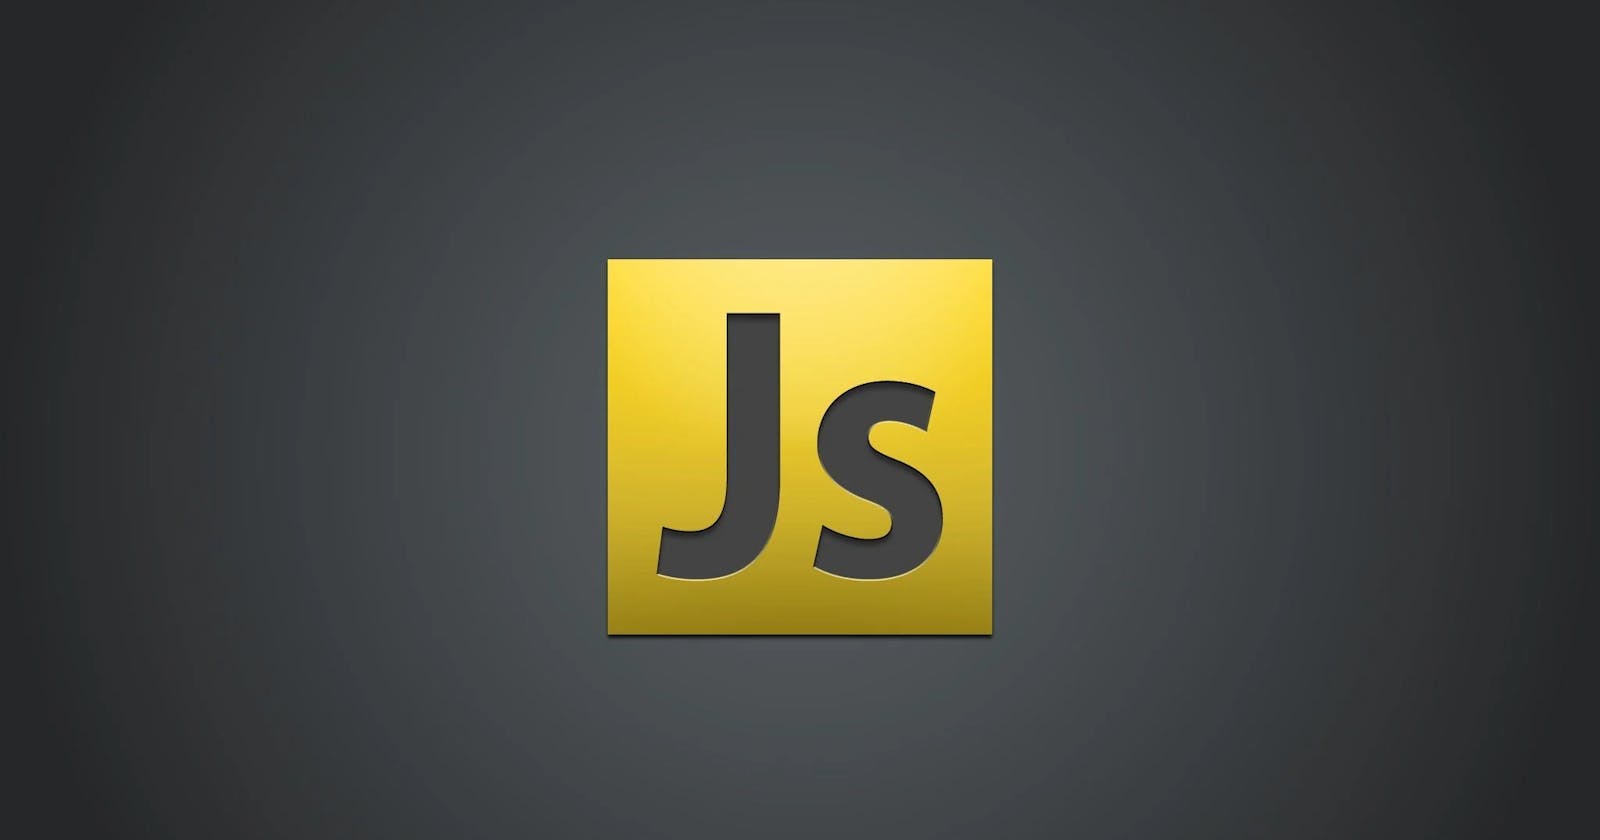 An Introduction to JavaScript: Empowering the Web with the Interactivity and Dynamism